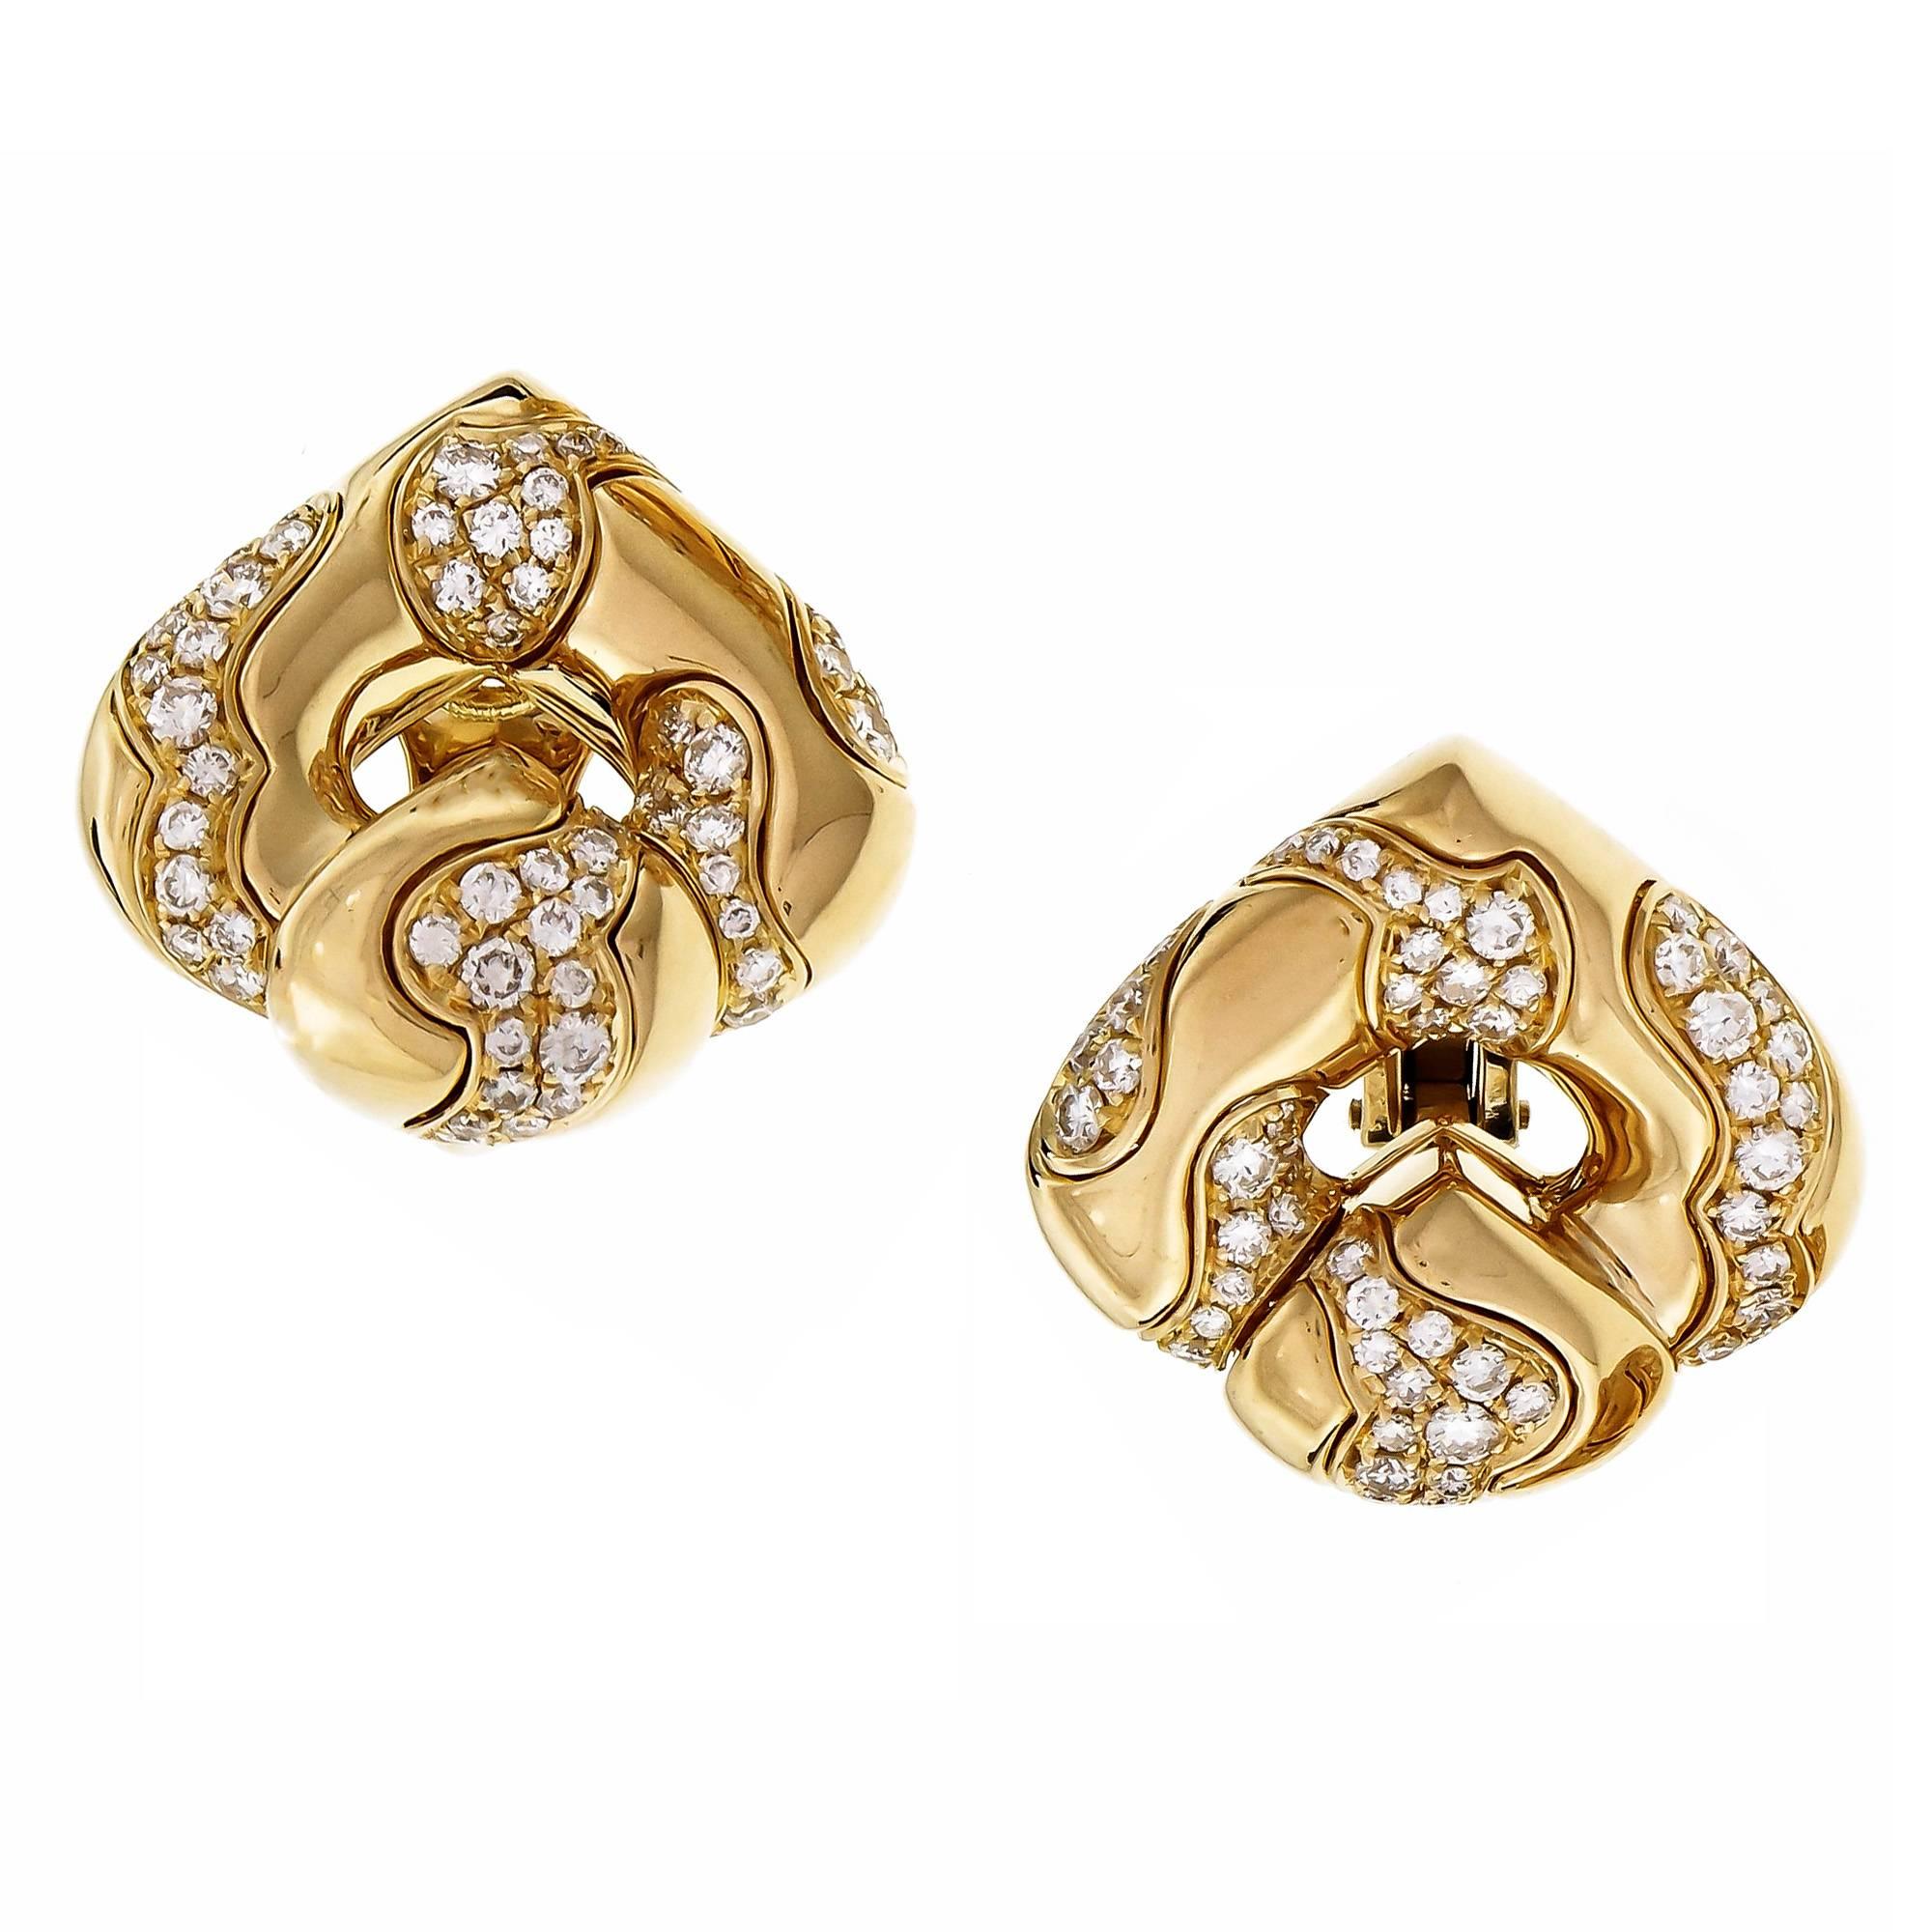 Marina B 18k yellow gold clip post earrings from her “Pardy” line set with sparkly full cut Diamonds. Large size.

114 round full cut Diamonds, approx. total weight 2.30cts, F, VS
18k yellow gold
Tested: 18k
Stamped: 750
Hallmark: Marina B *2875 AL